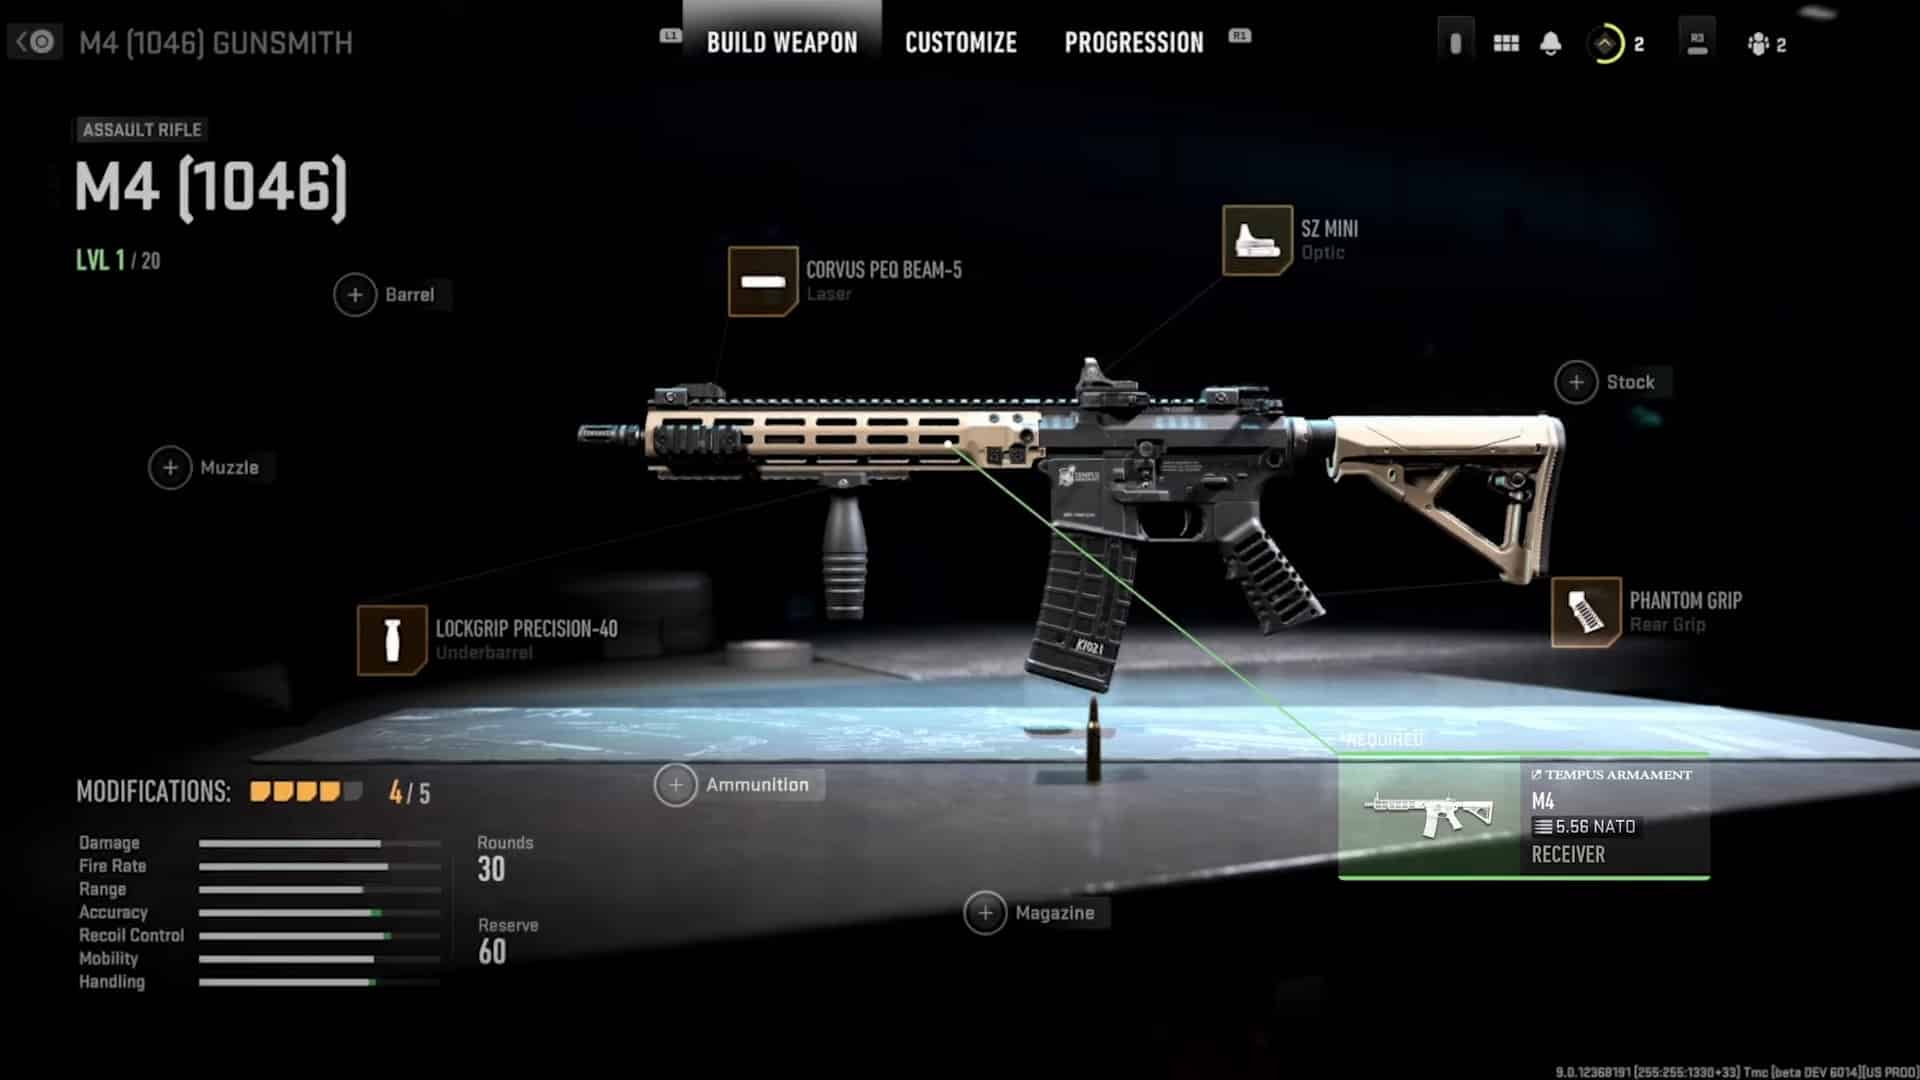 (The receiver attachment (bottom right in the picture) is crucial for the new Gunsmith and opens up many new builds.)